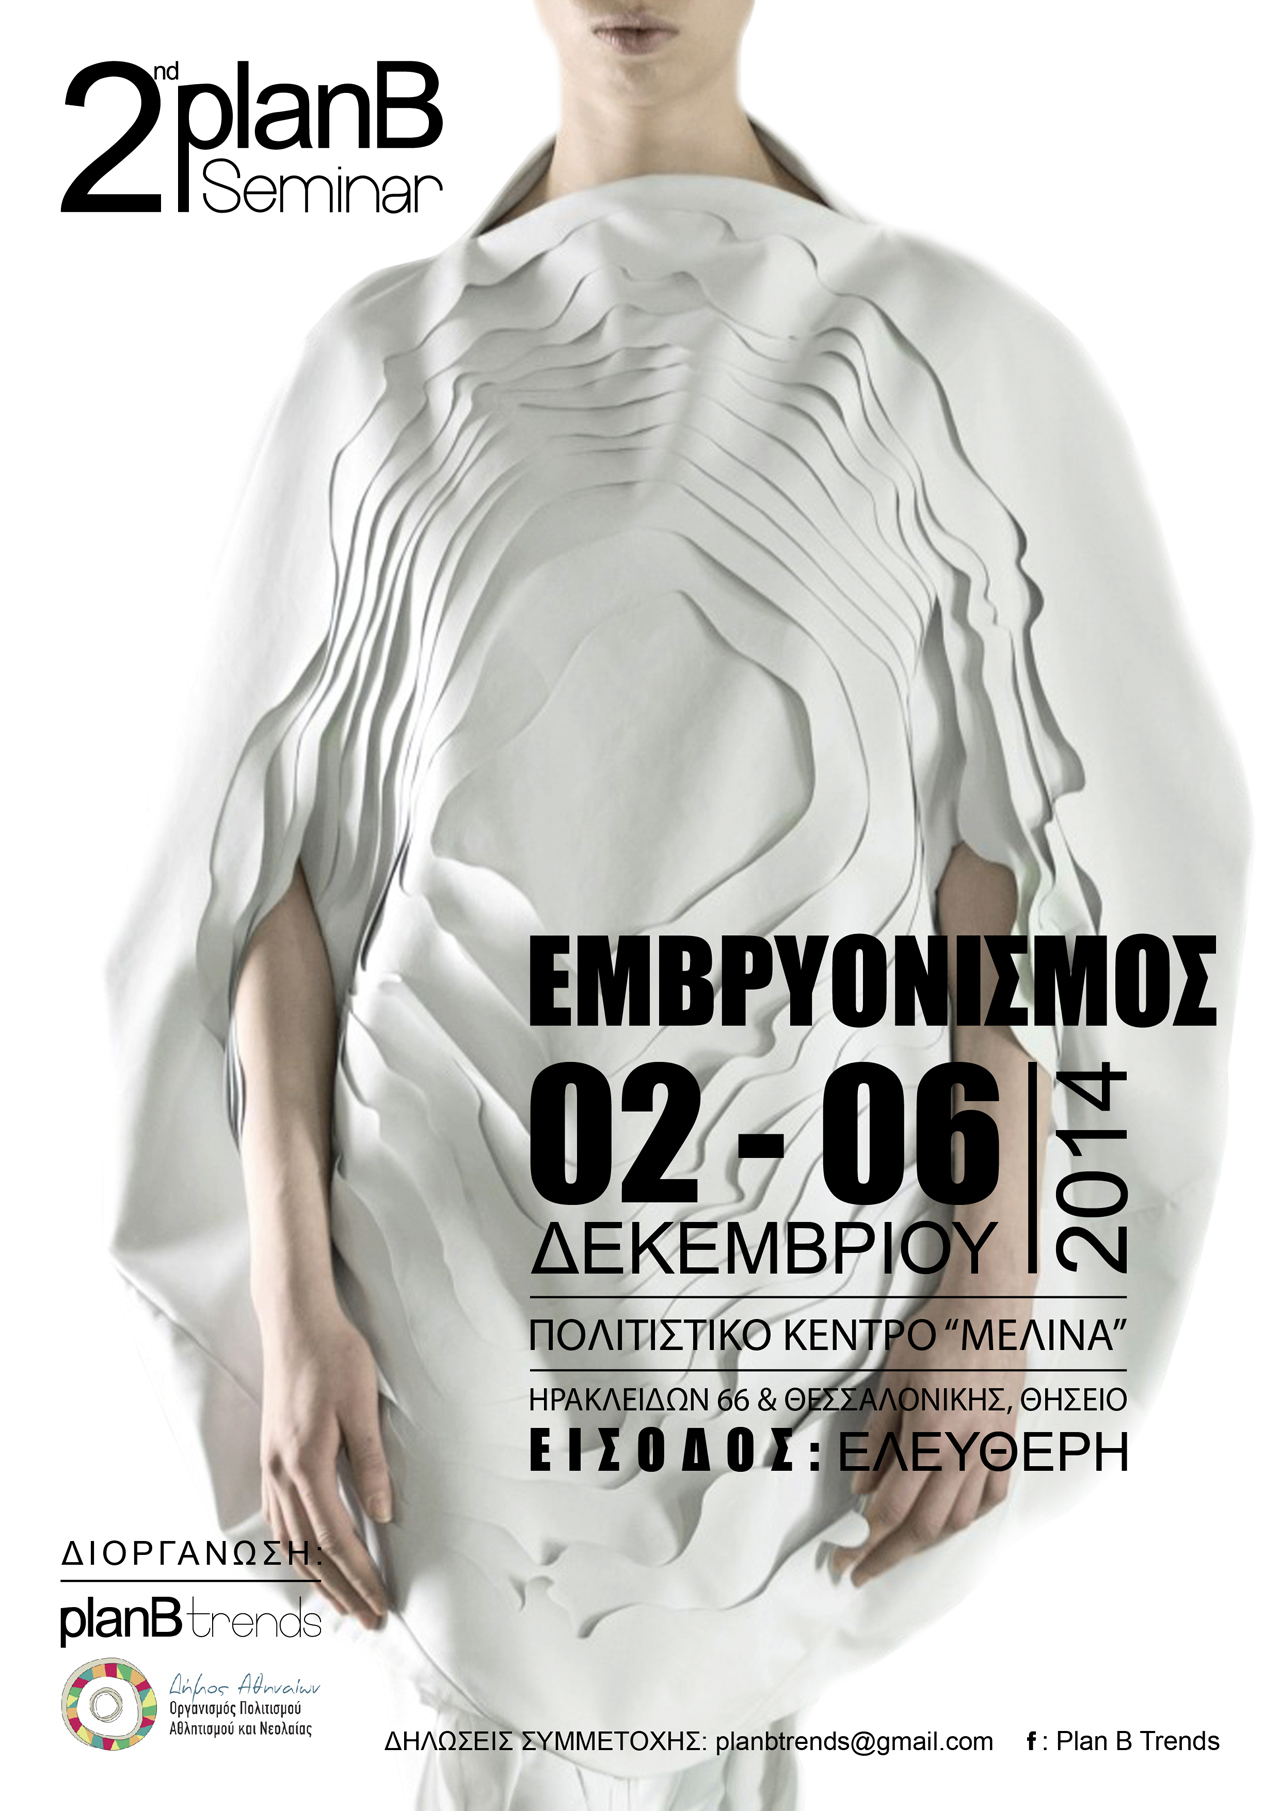 Invitation for the 2nd PlanB seminar: EMBRYONISM December 2014